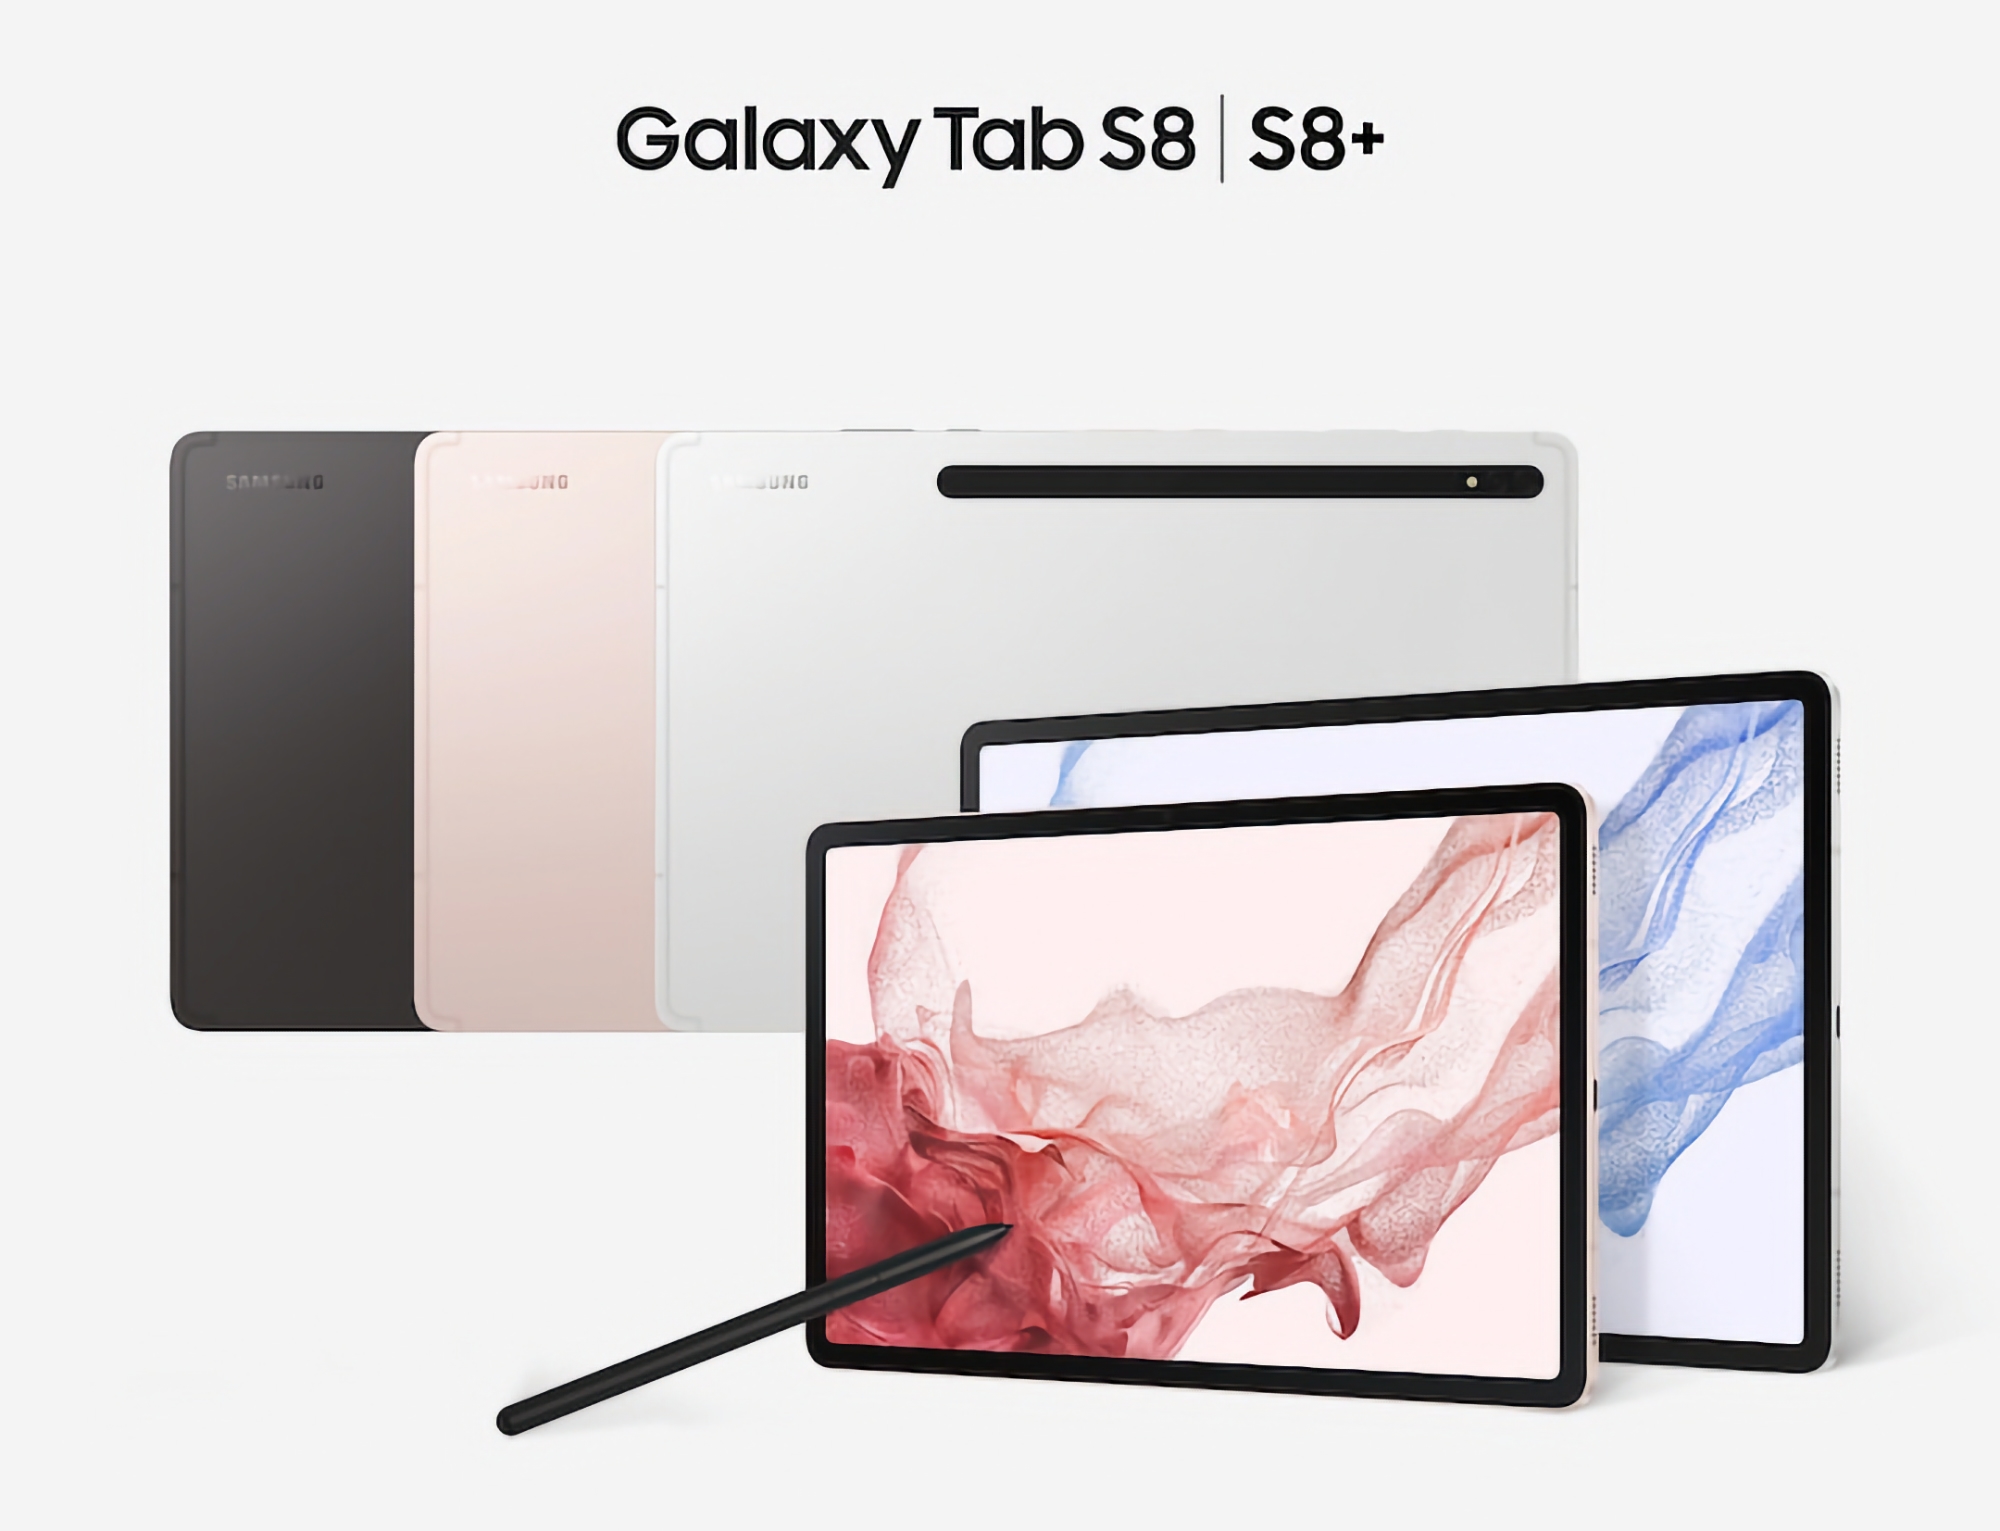 Samsung Galaxy Tab S8 and Galaxy Tab S8+ are on sale on Amazon with up to $230 discount